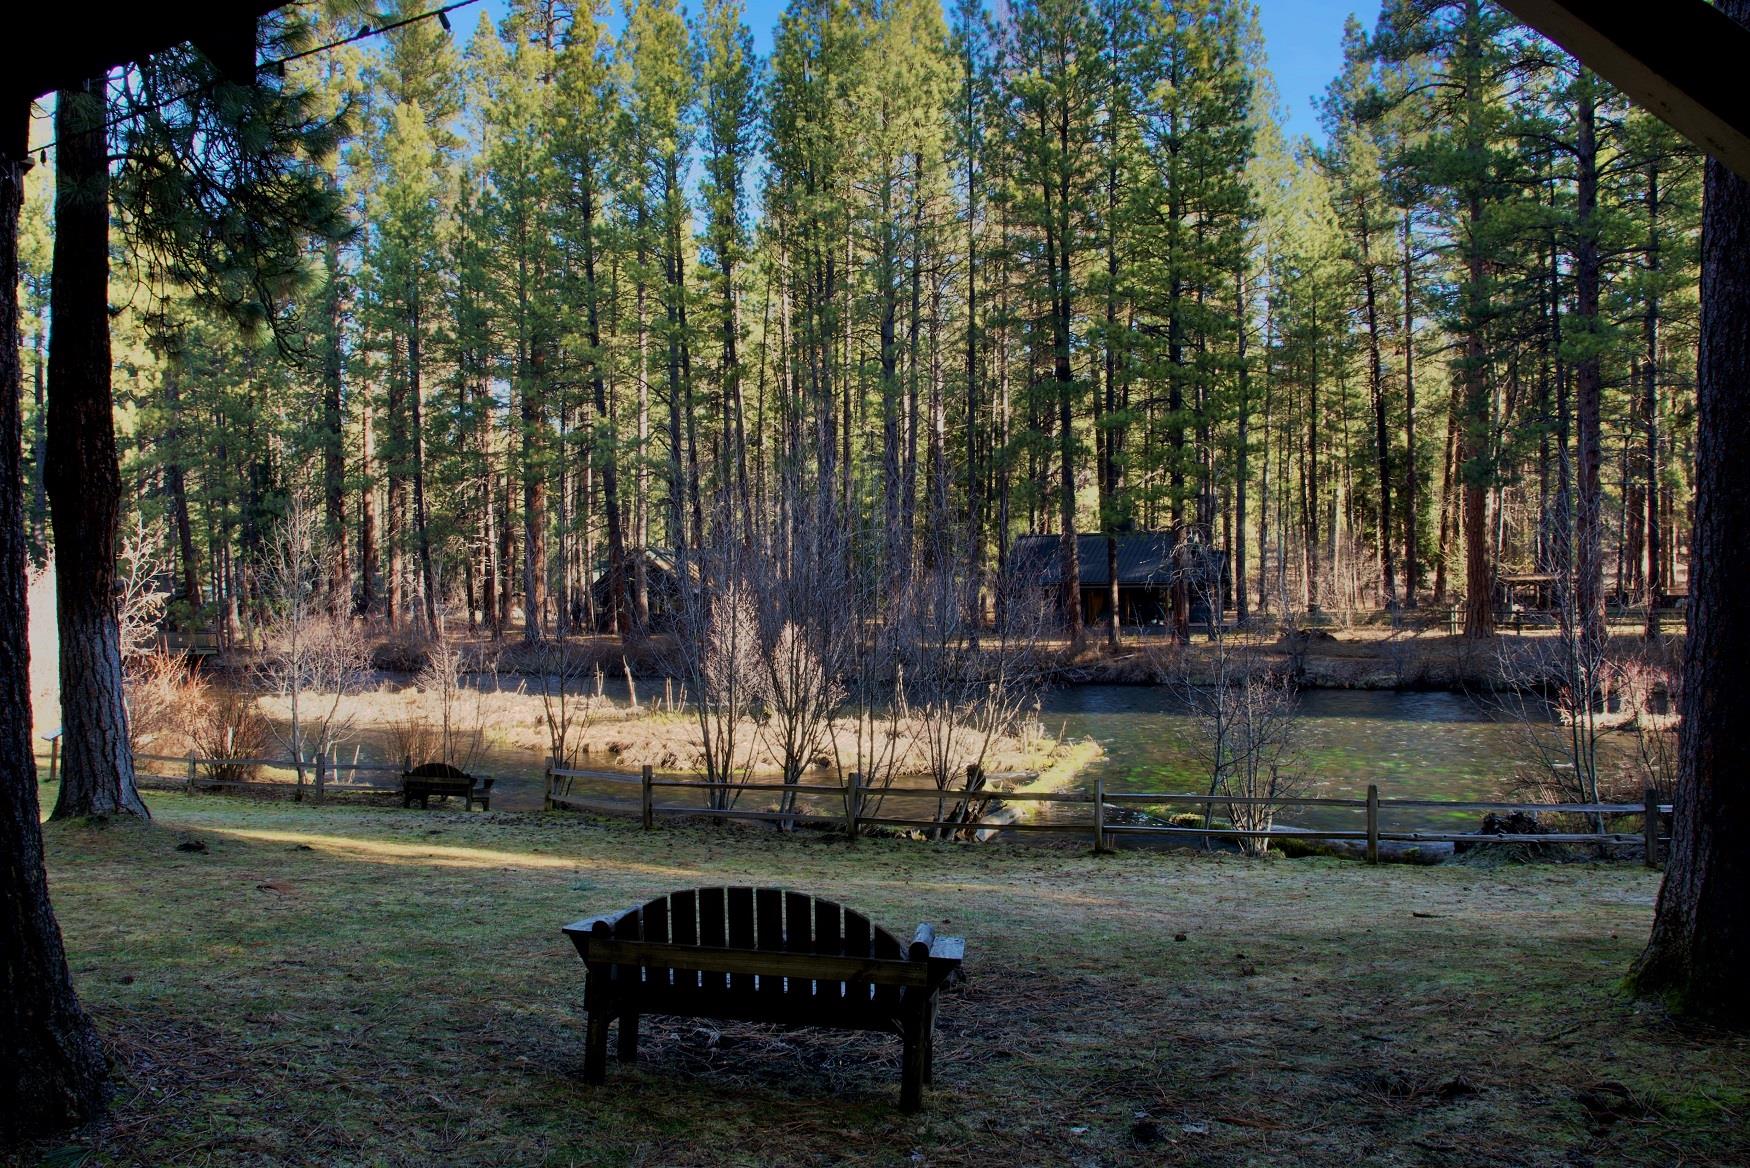 A perfect view of the Metolius River, off the deck of Log Cabin, at Cold Springs Resort in Camp Sherman, Oregon